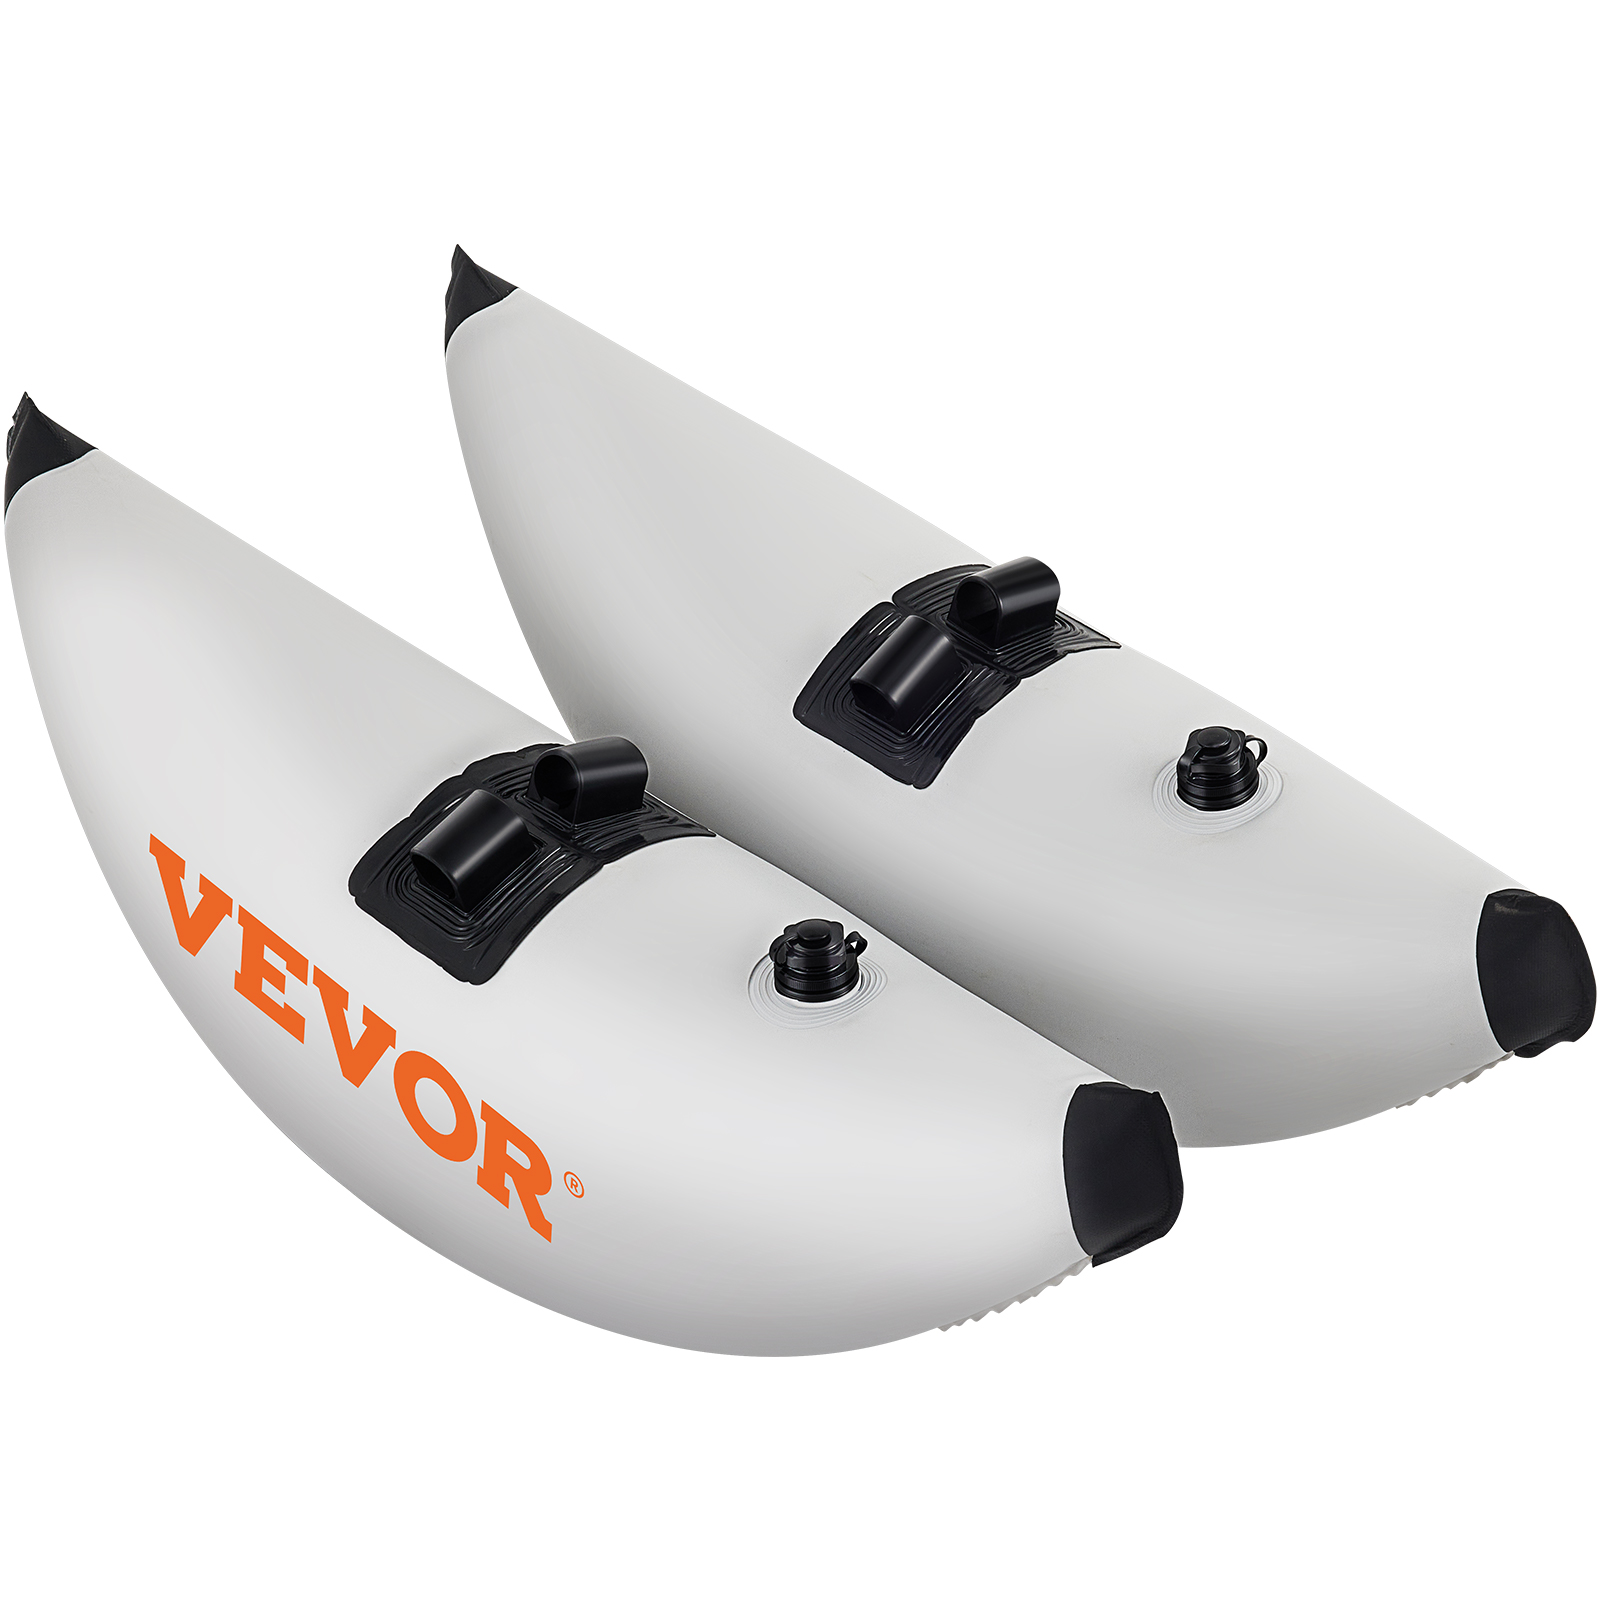 VEVOR Kayak Outrigger Stabilizers, 2 Pcs, PVC Inflatable Outrigger Float with Sidekick Arms Rod, Standing Float Stabilizer SYS